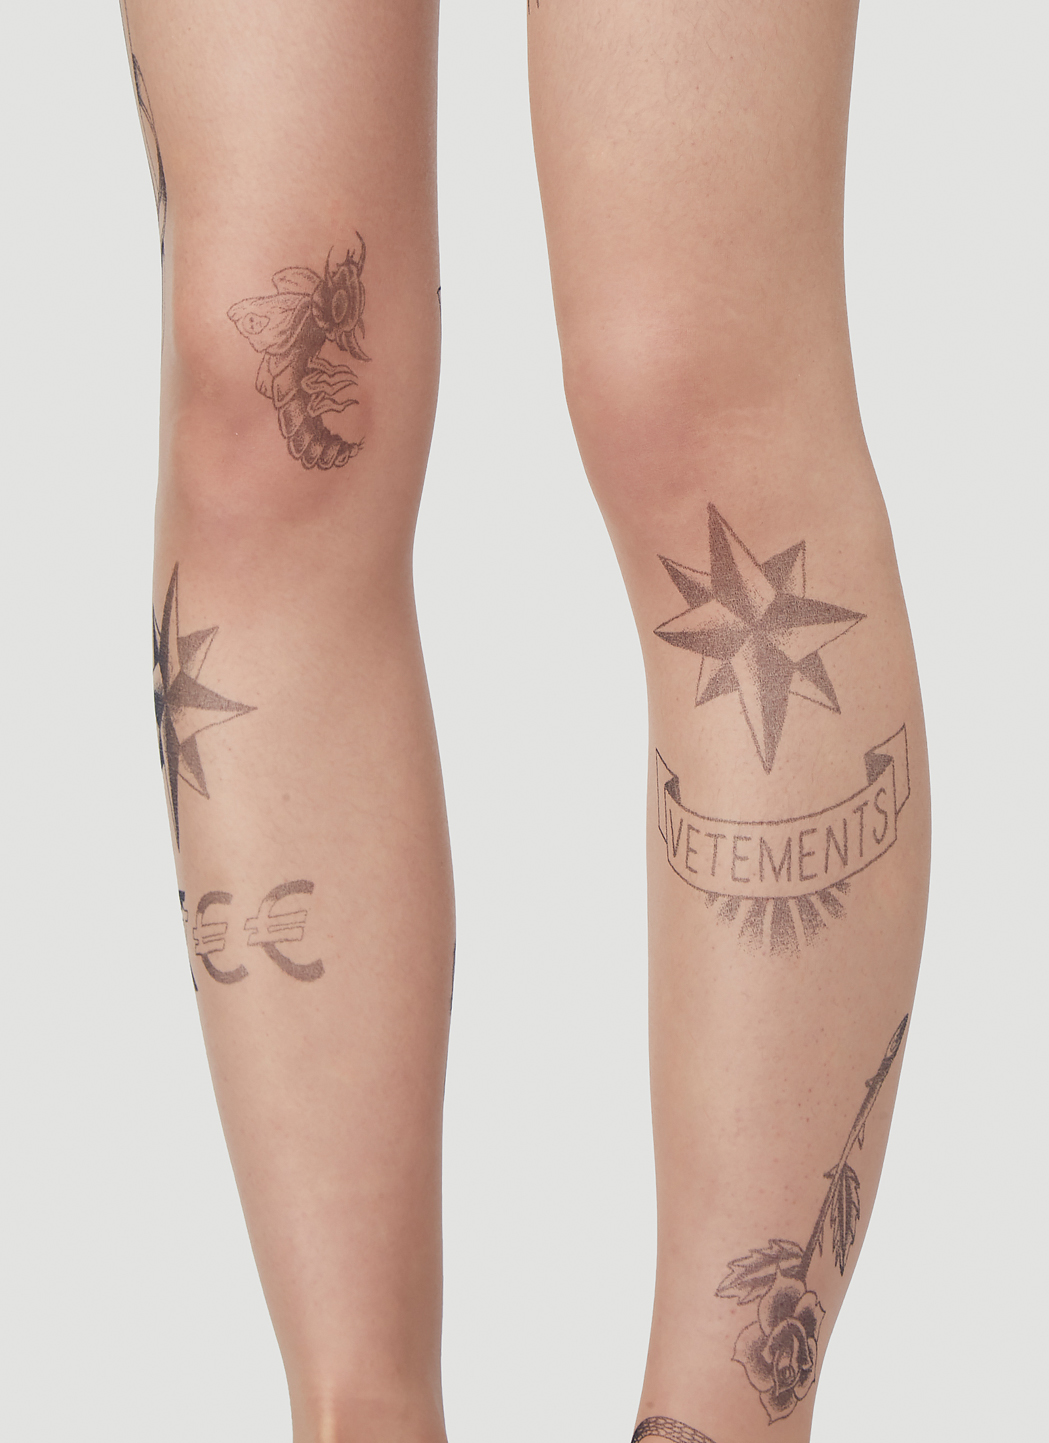 Vetements Wolford Tattoo Tights Top Sellers, SAVE 39% 